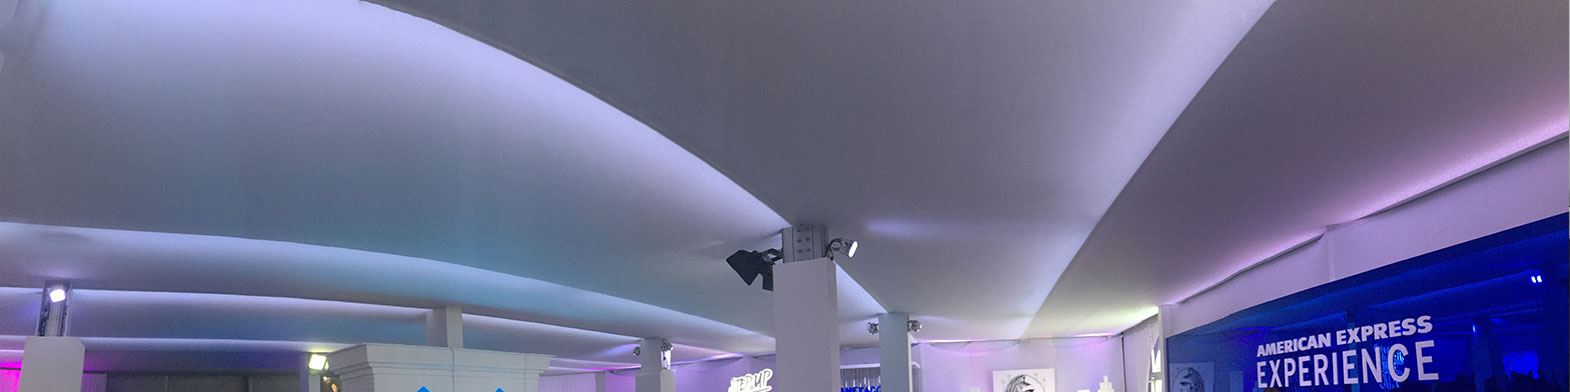 A Tent Liner lines the ceiling at the American Express Experience